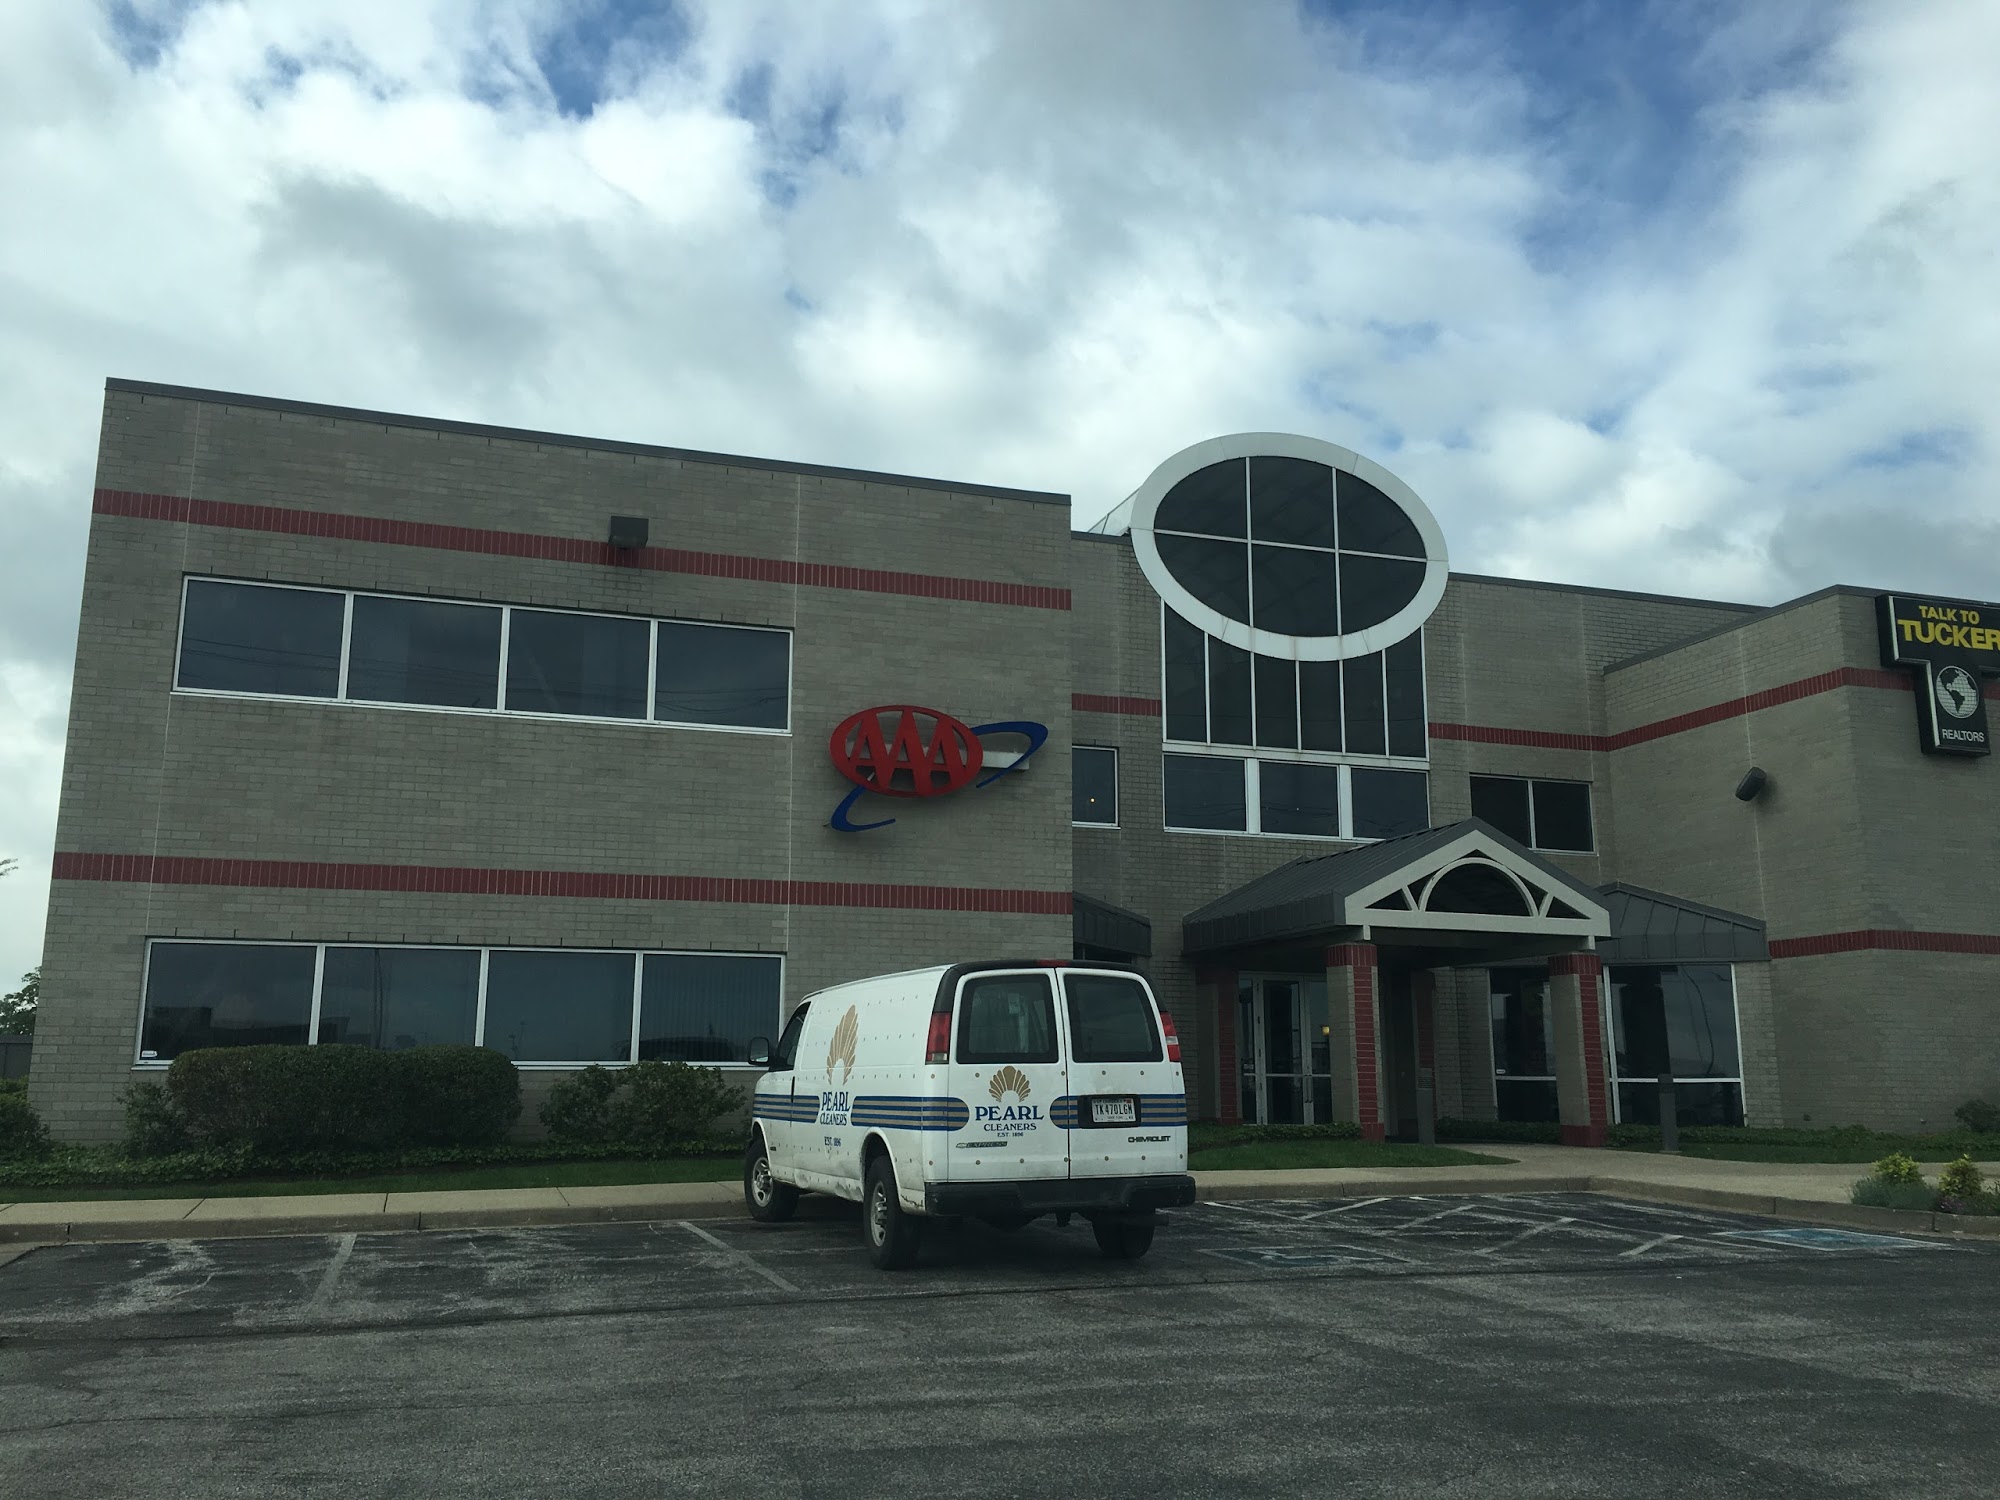 AAA Evansville Insurance and Member Services